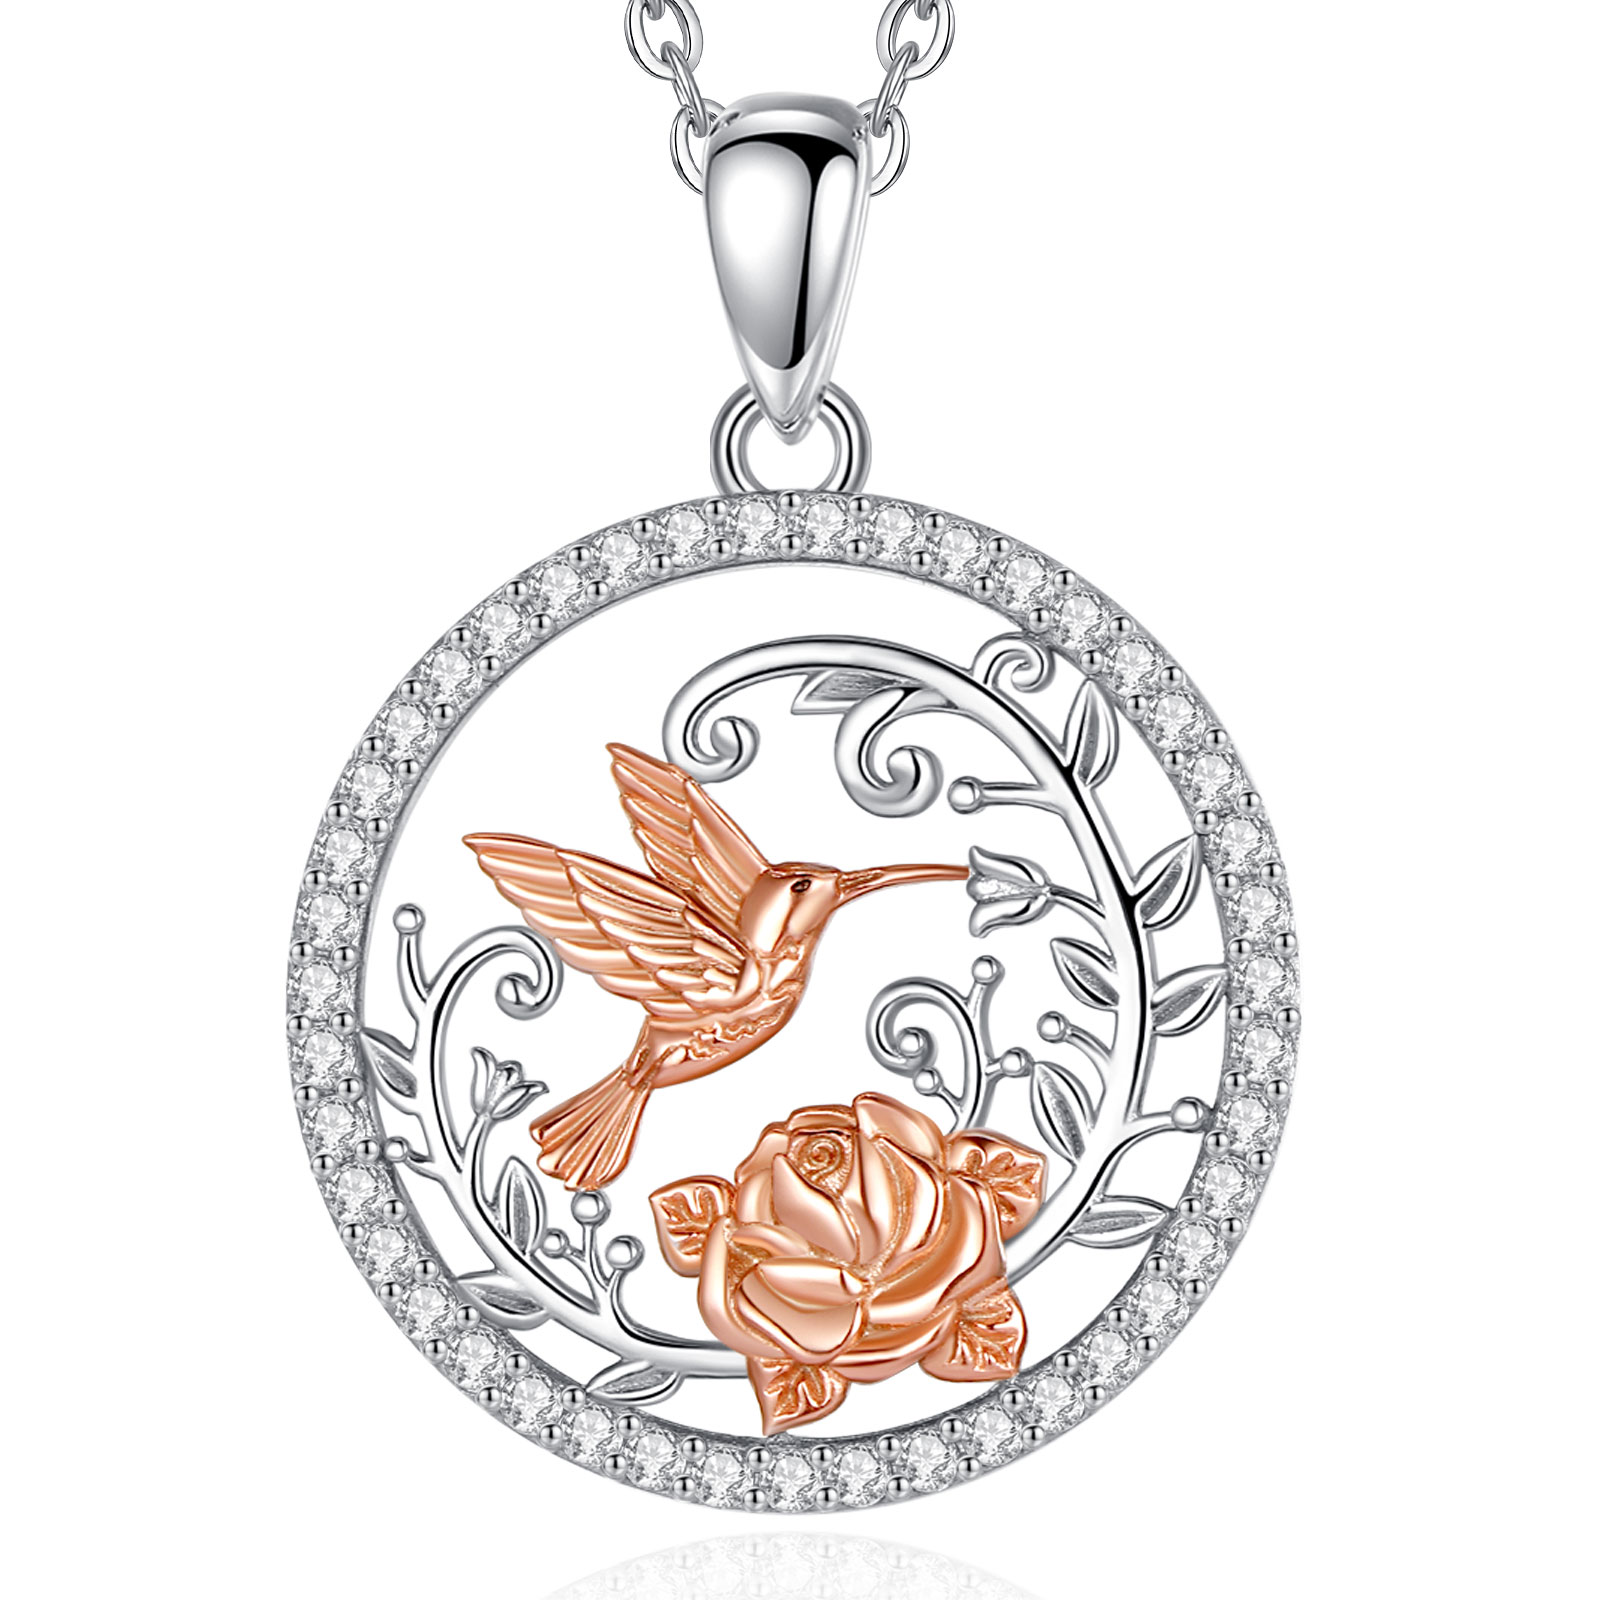 Merryshine 925 Sterling Silver Jewelry Rose Gold Flower and Elegant Hummingbird Pendant Necklace for Women